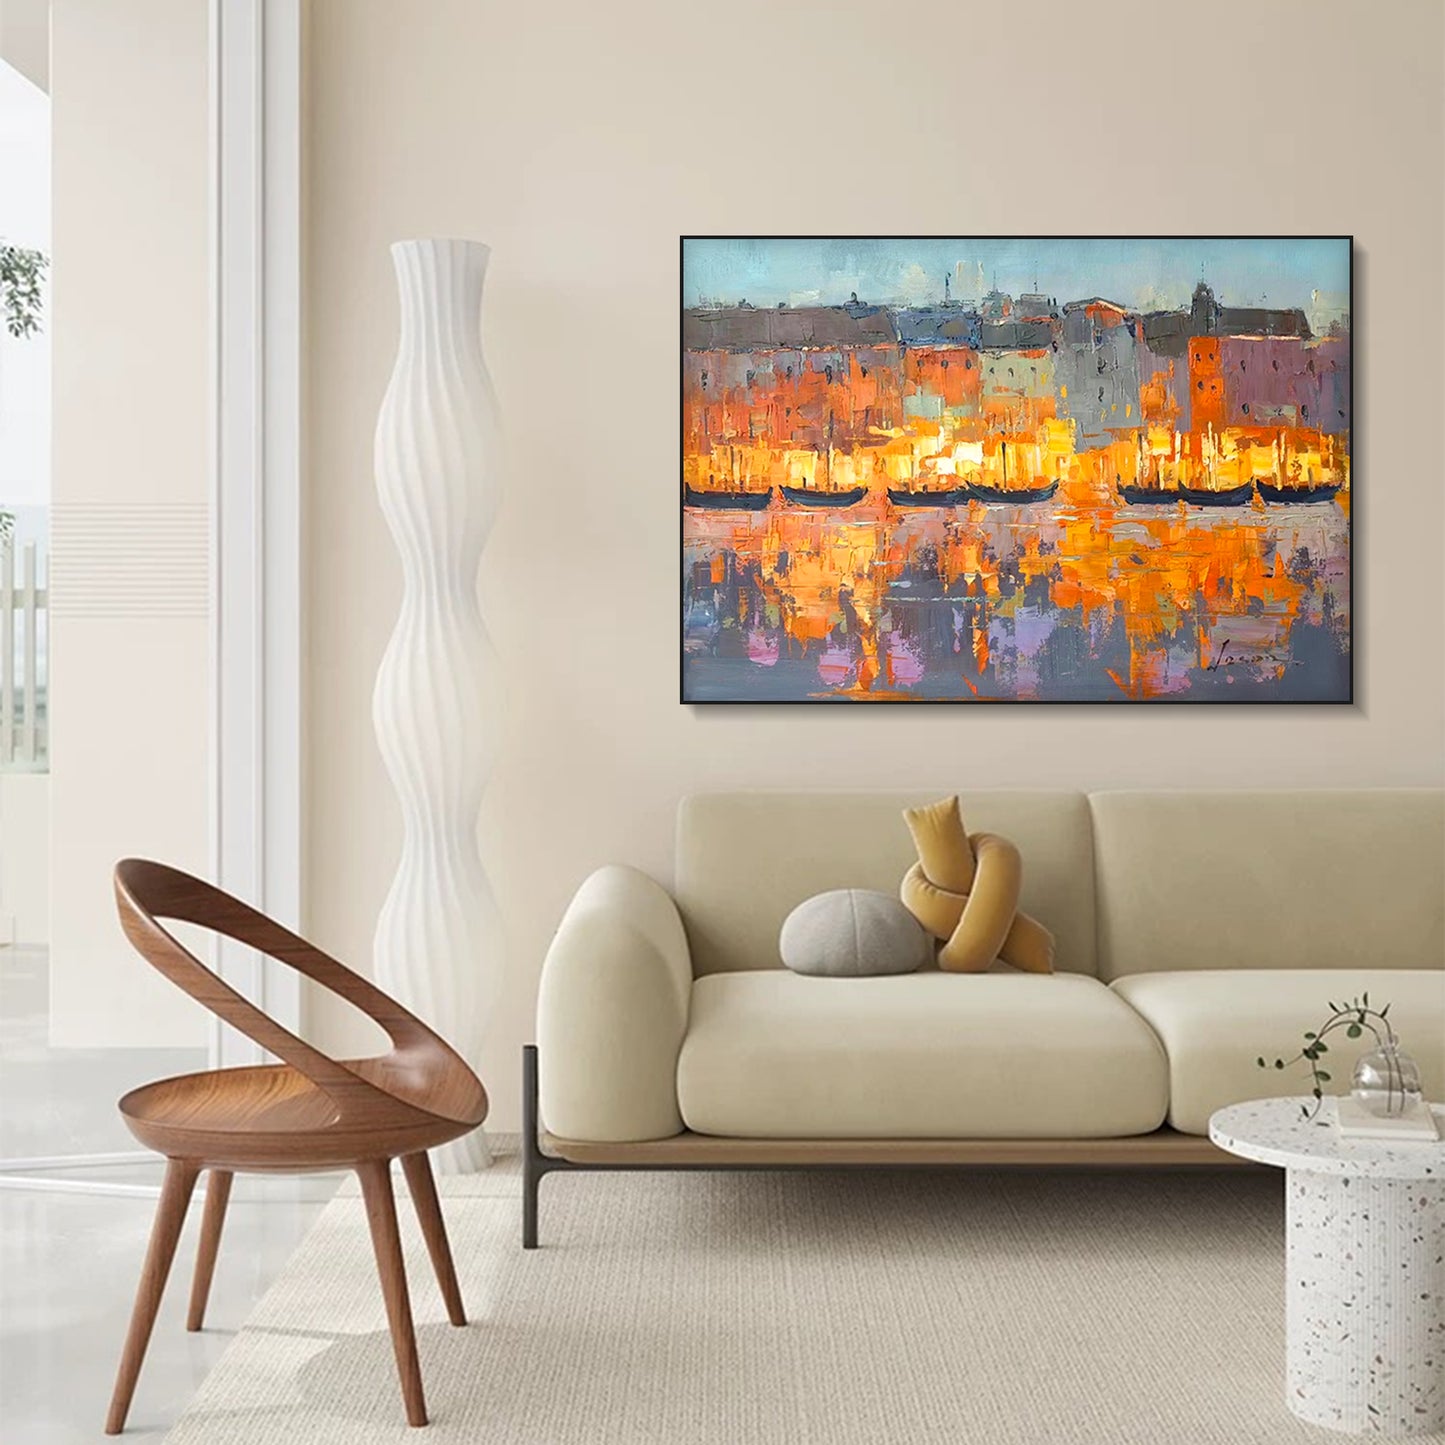 LANDSCAPE PAINTING, COASTAL BRIGHT LIGHTS, HAND-PAINTED CANVAS